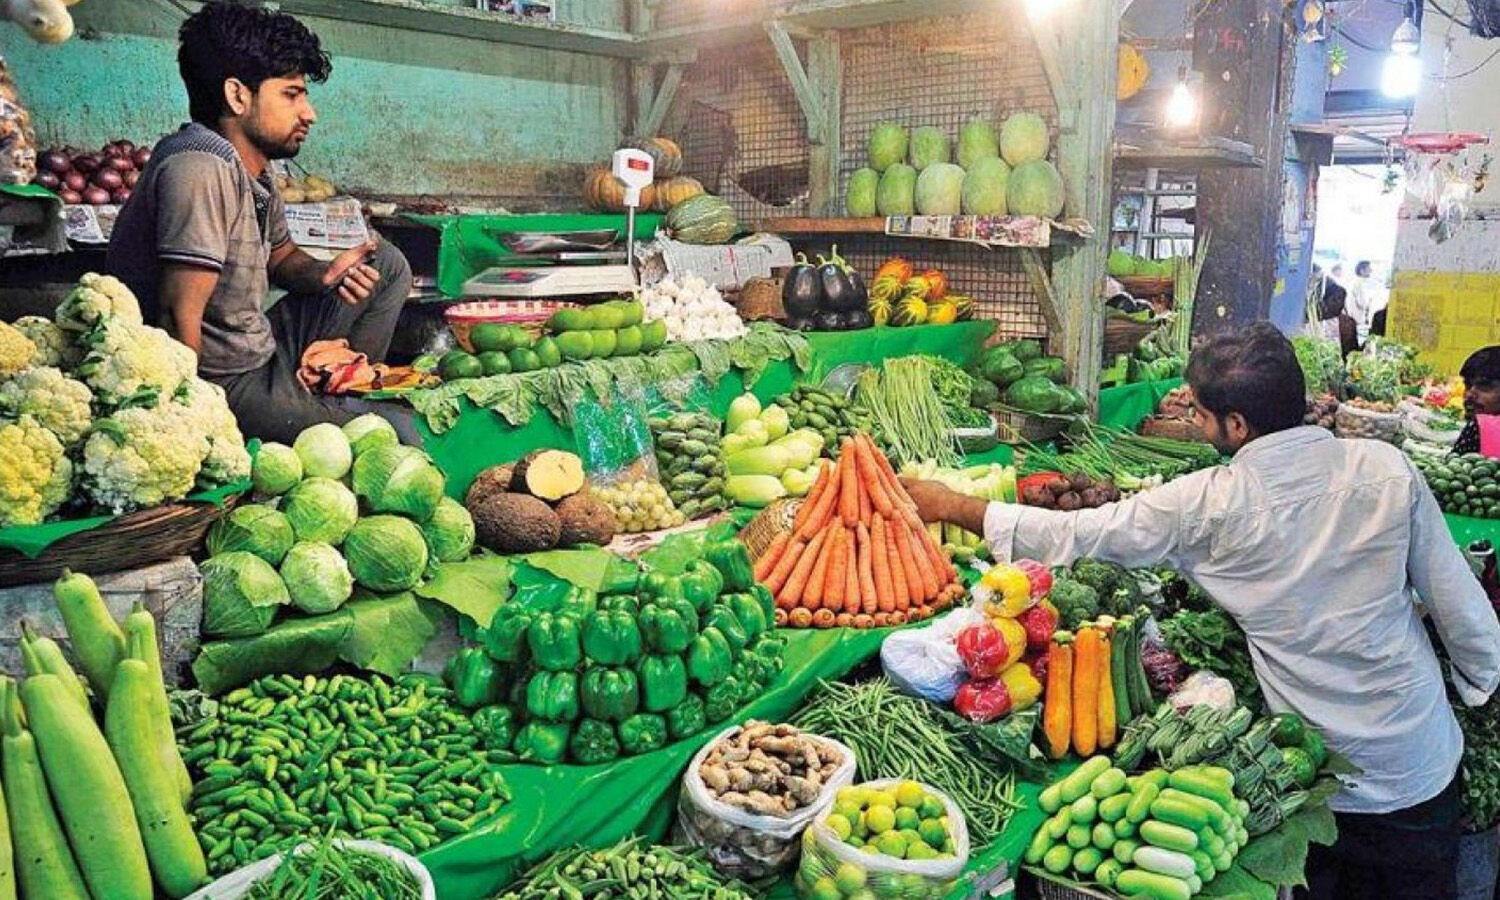 UP Vegetable Price: Vegetable prices continue to rise, know what is the price of vegetables in your city